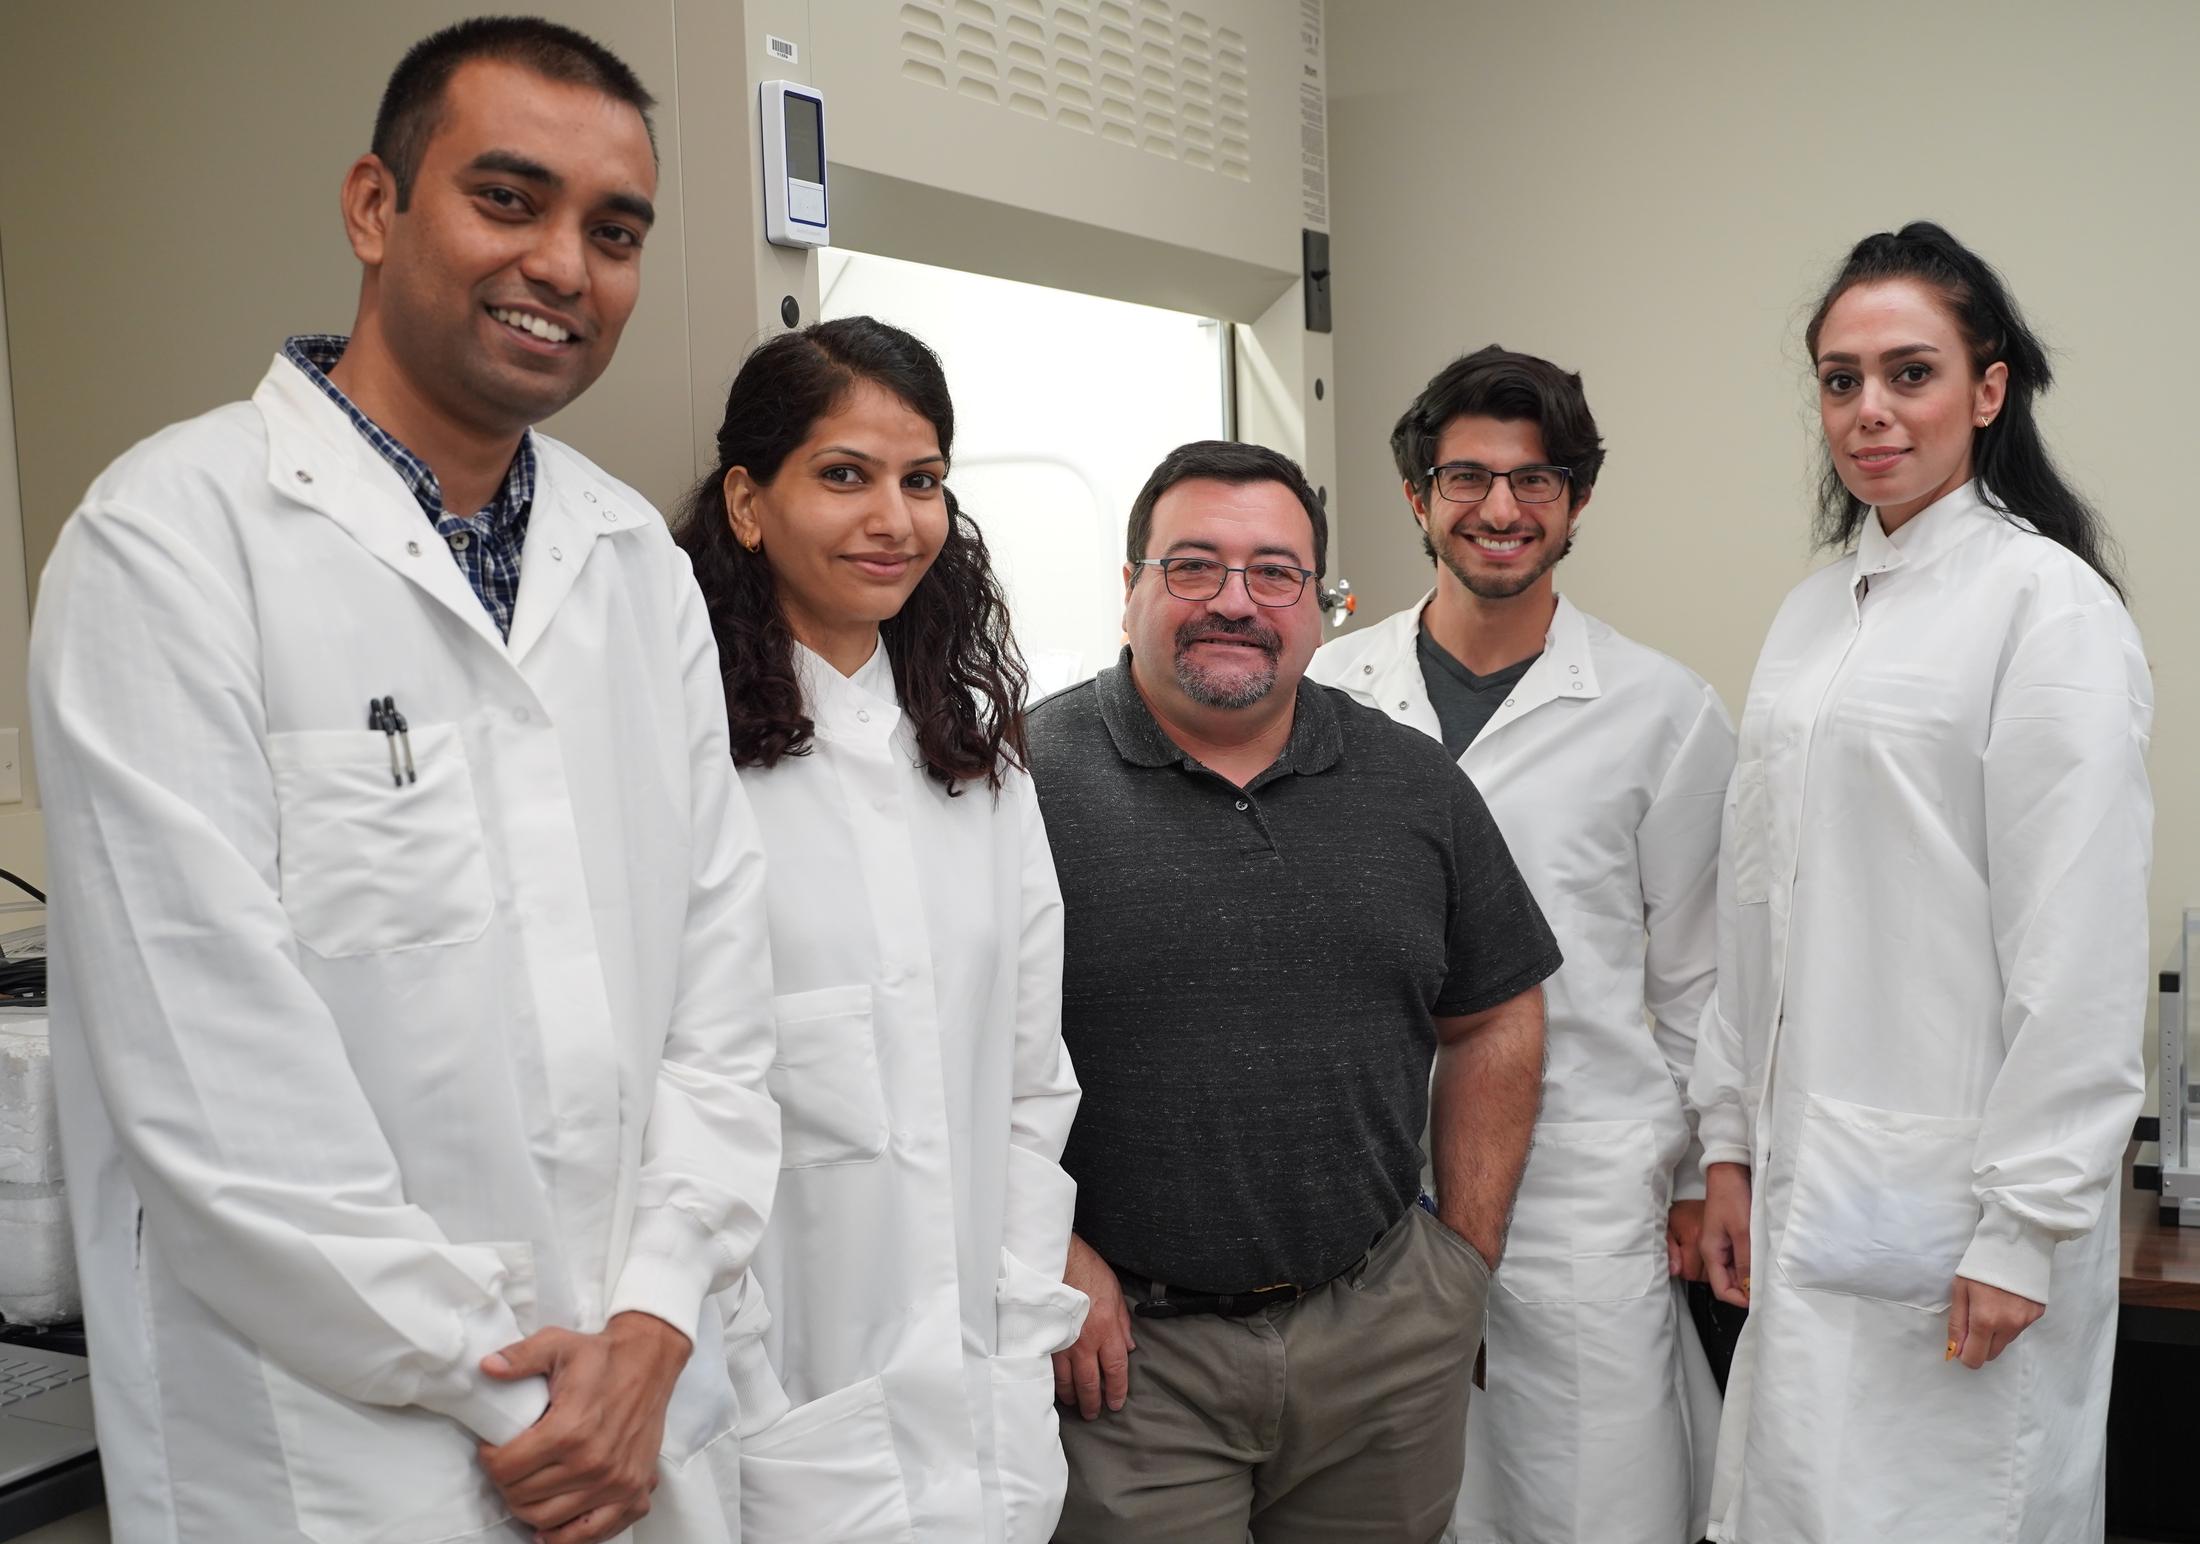 Luca Cucullo and his team of researchers